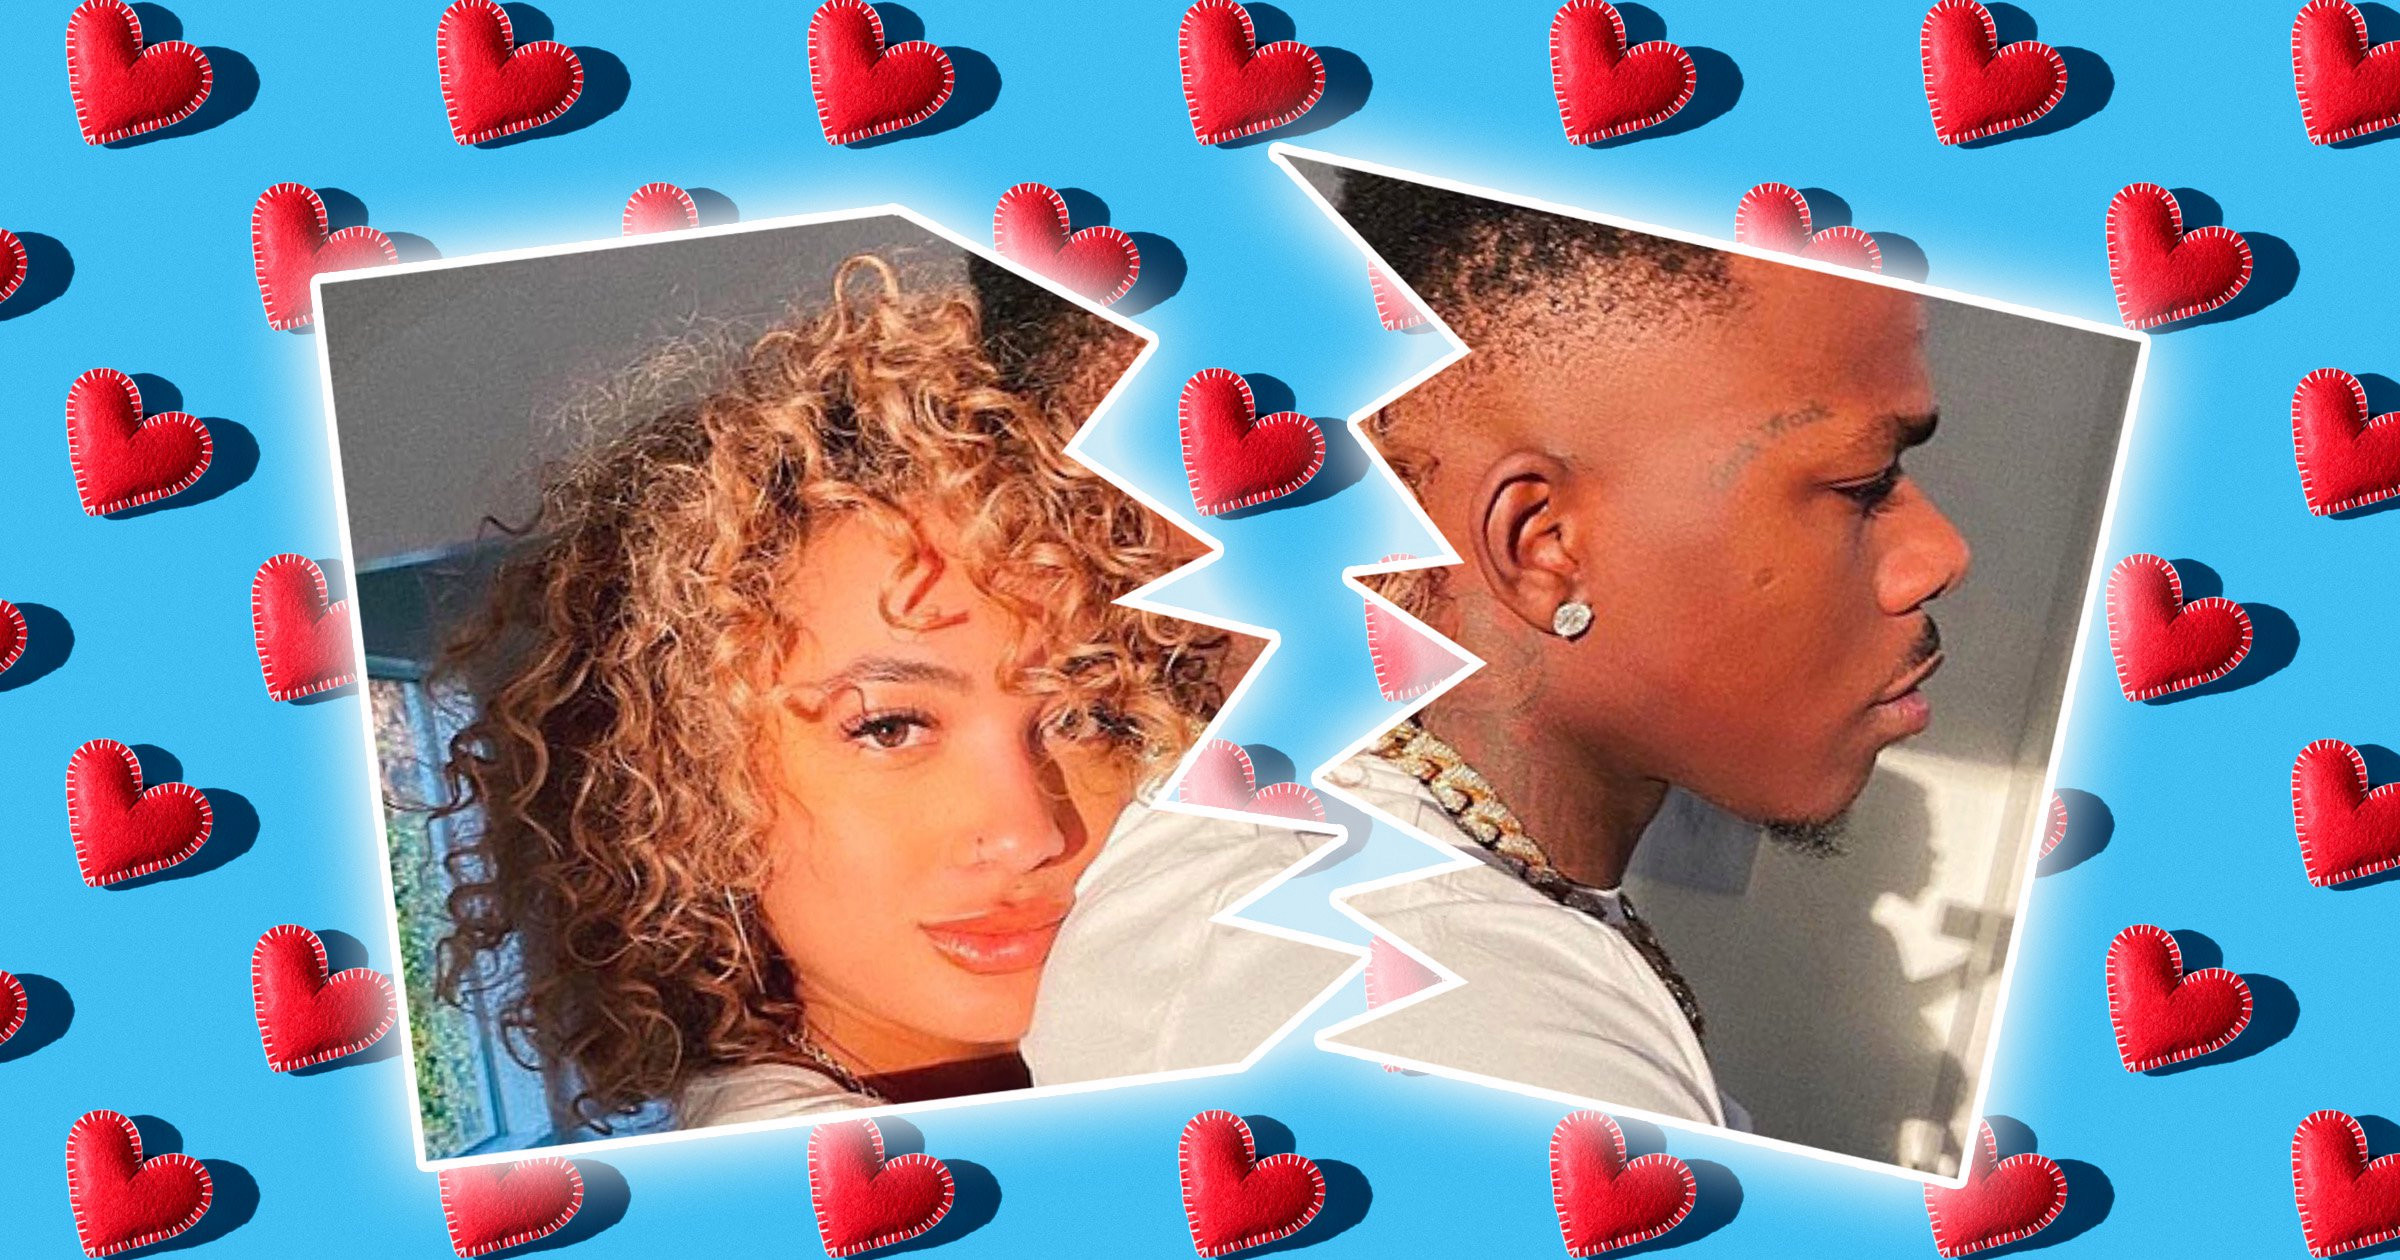 DaniLeigh confirms split from DaBaby after Yellow Bone controversy: ‘Officially single’